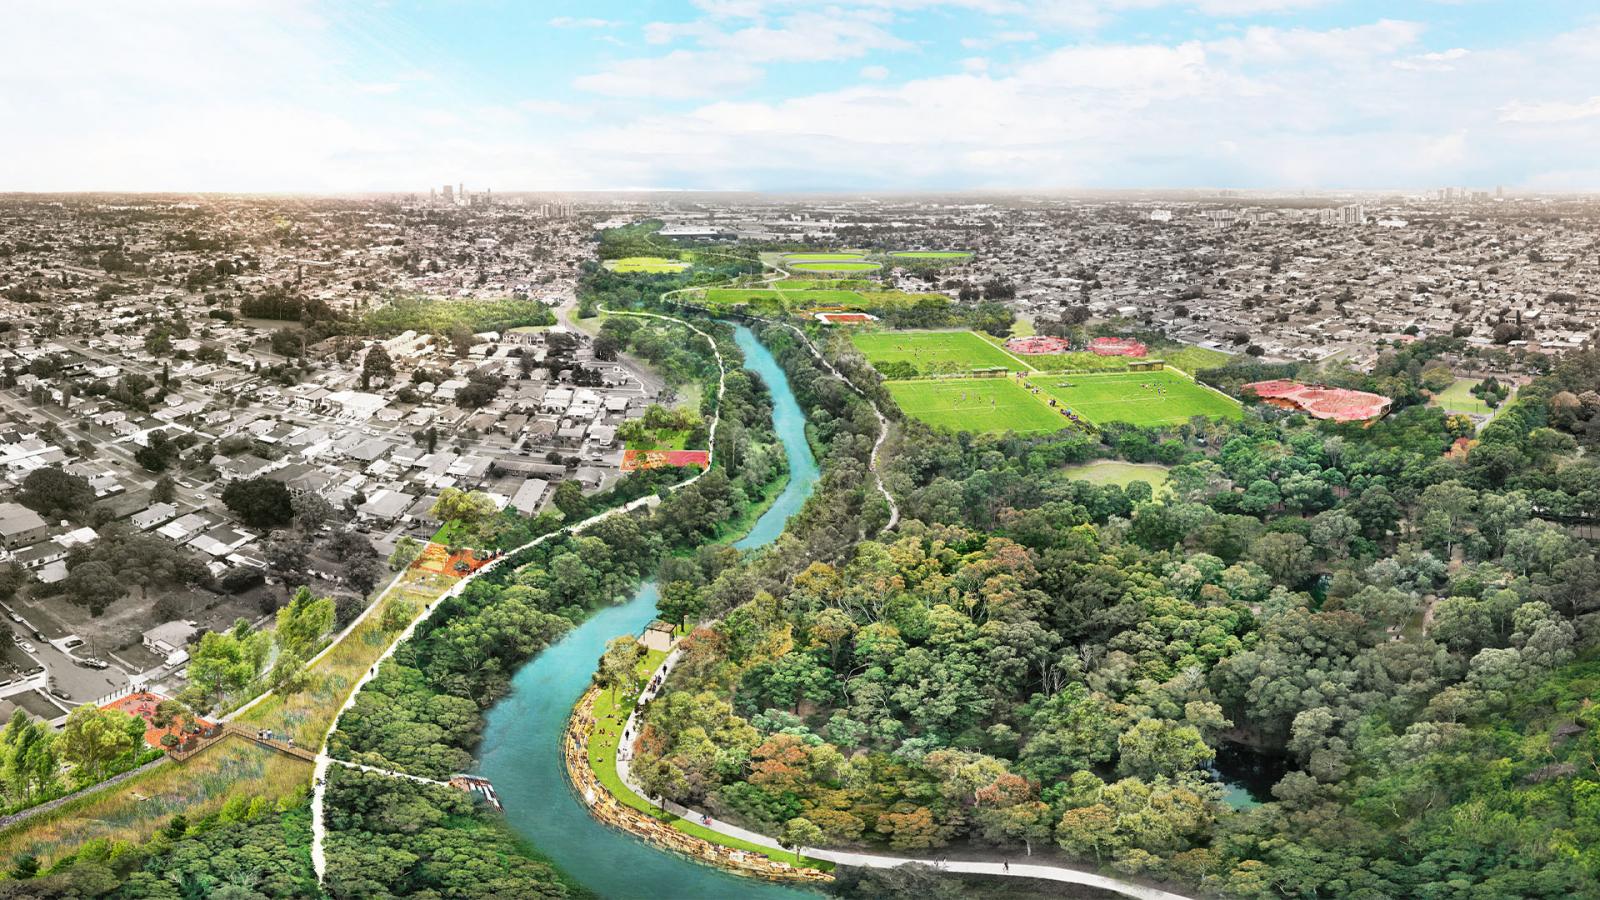 A vibrant aerial view of a city landscape with the Duck River winding through the middle. The left side displays urban buildings and homes, while the right side features lush greenery, parks, and sports fields. This masterplan highlights harmony between urban development and natural beauty under a partly cloudy sky.